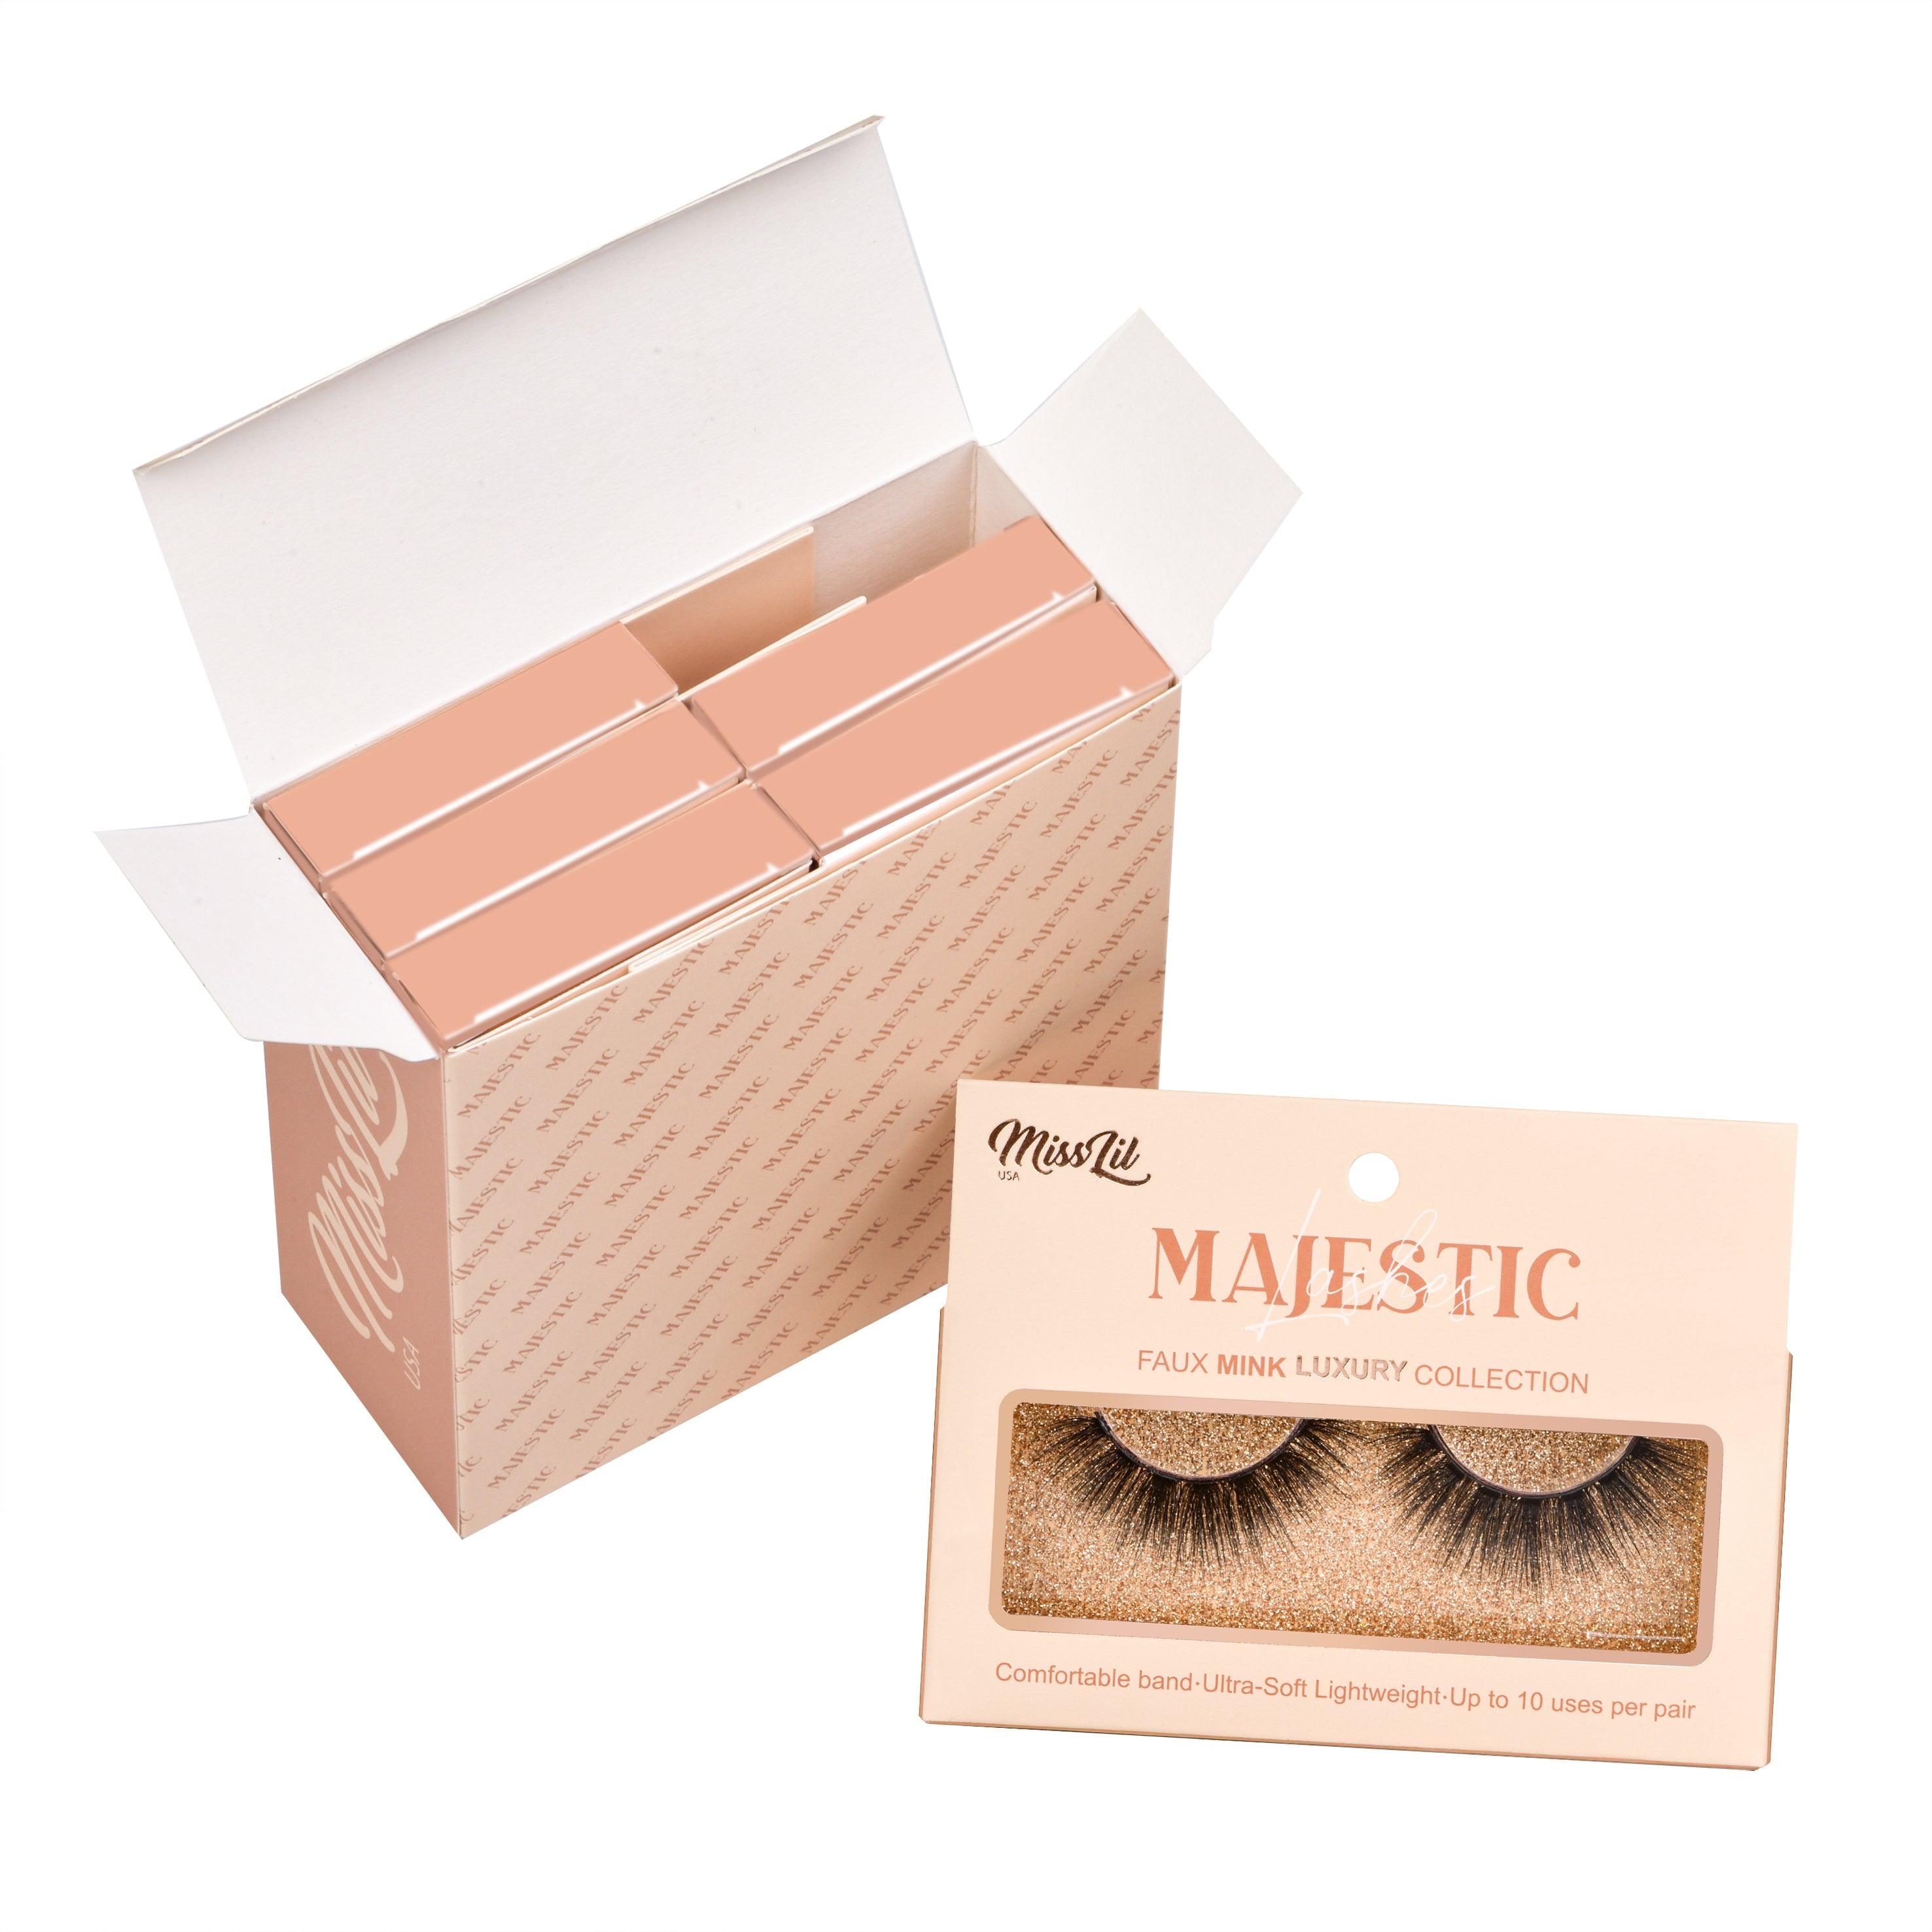 1-PAIR LASHES-MAJESTIC COLLECTION #24 (PACK OF 3) - Miss Lil USA